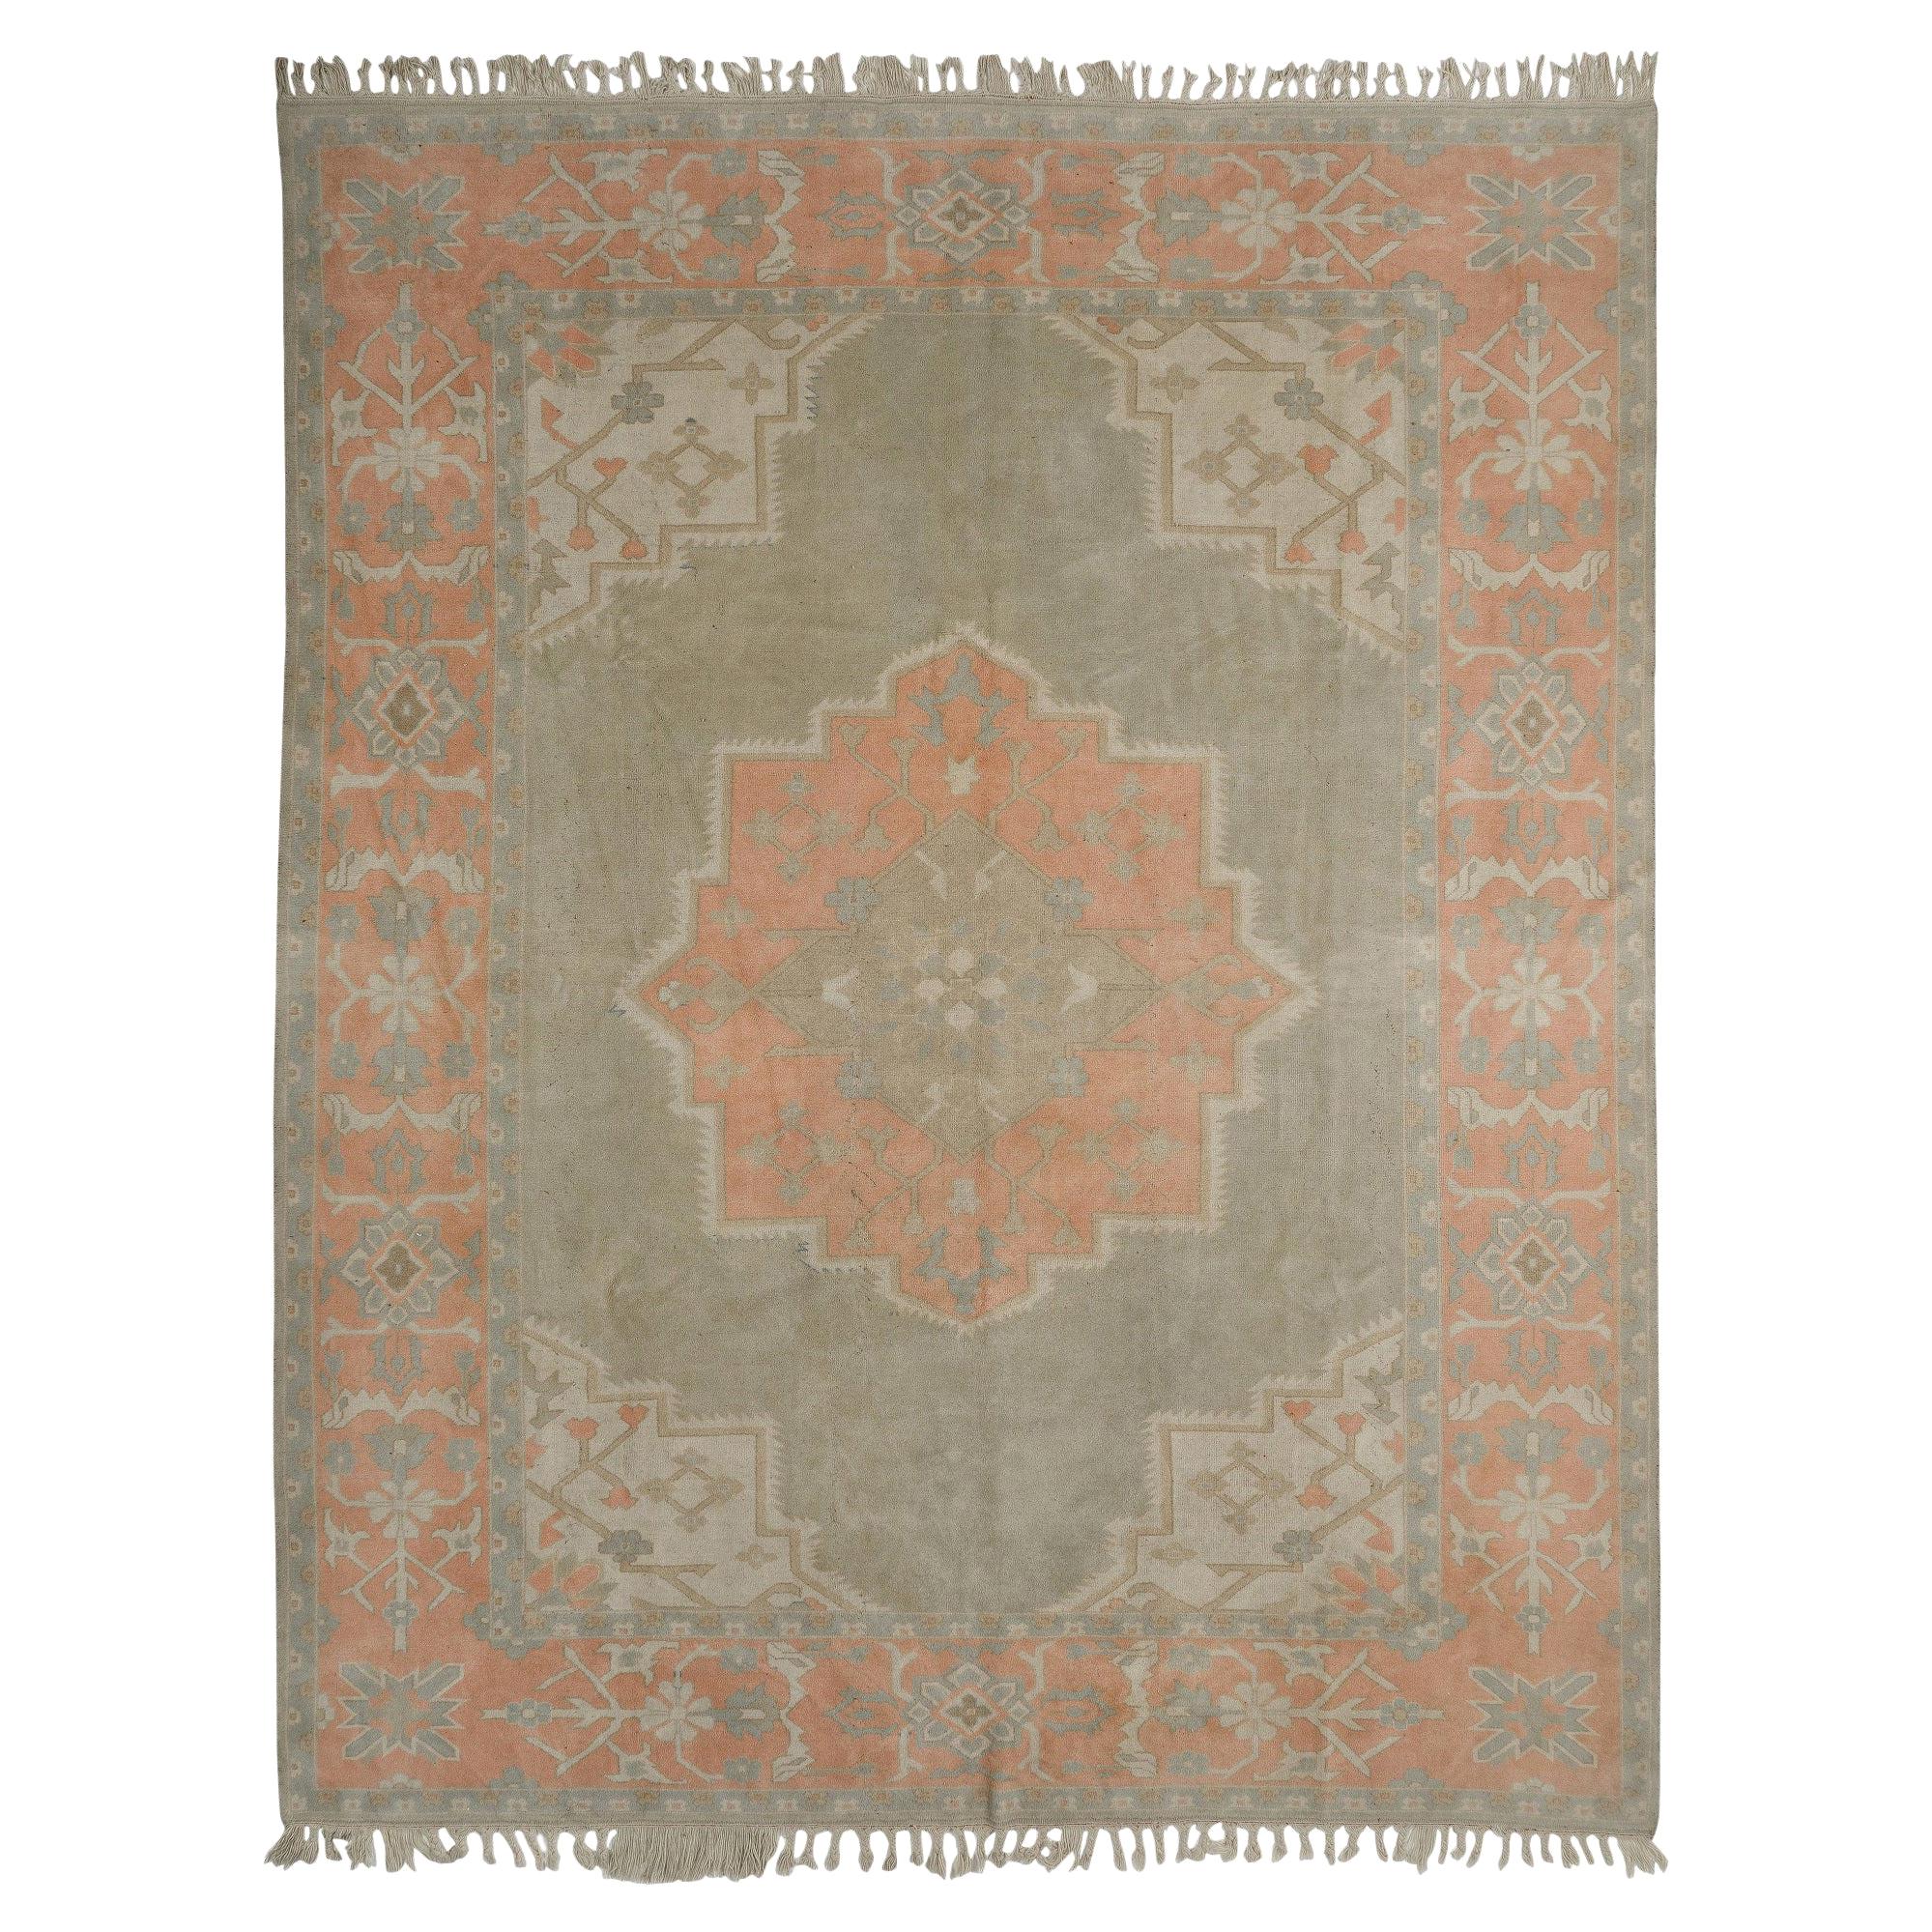 10x12.4 Ft Midcentury One-of-a-Kind Oushak Wool Rug in Soft Colors, Natural Dyes For Sale